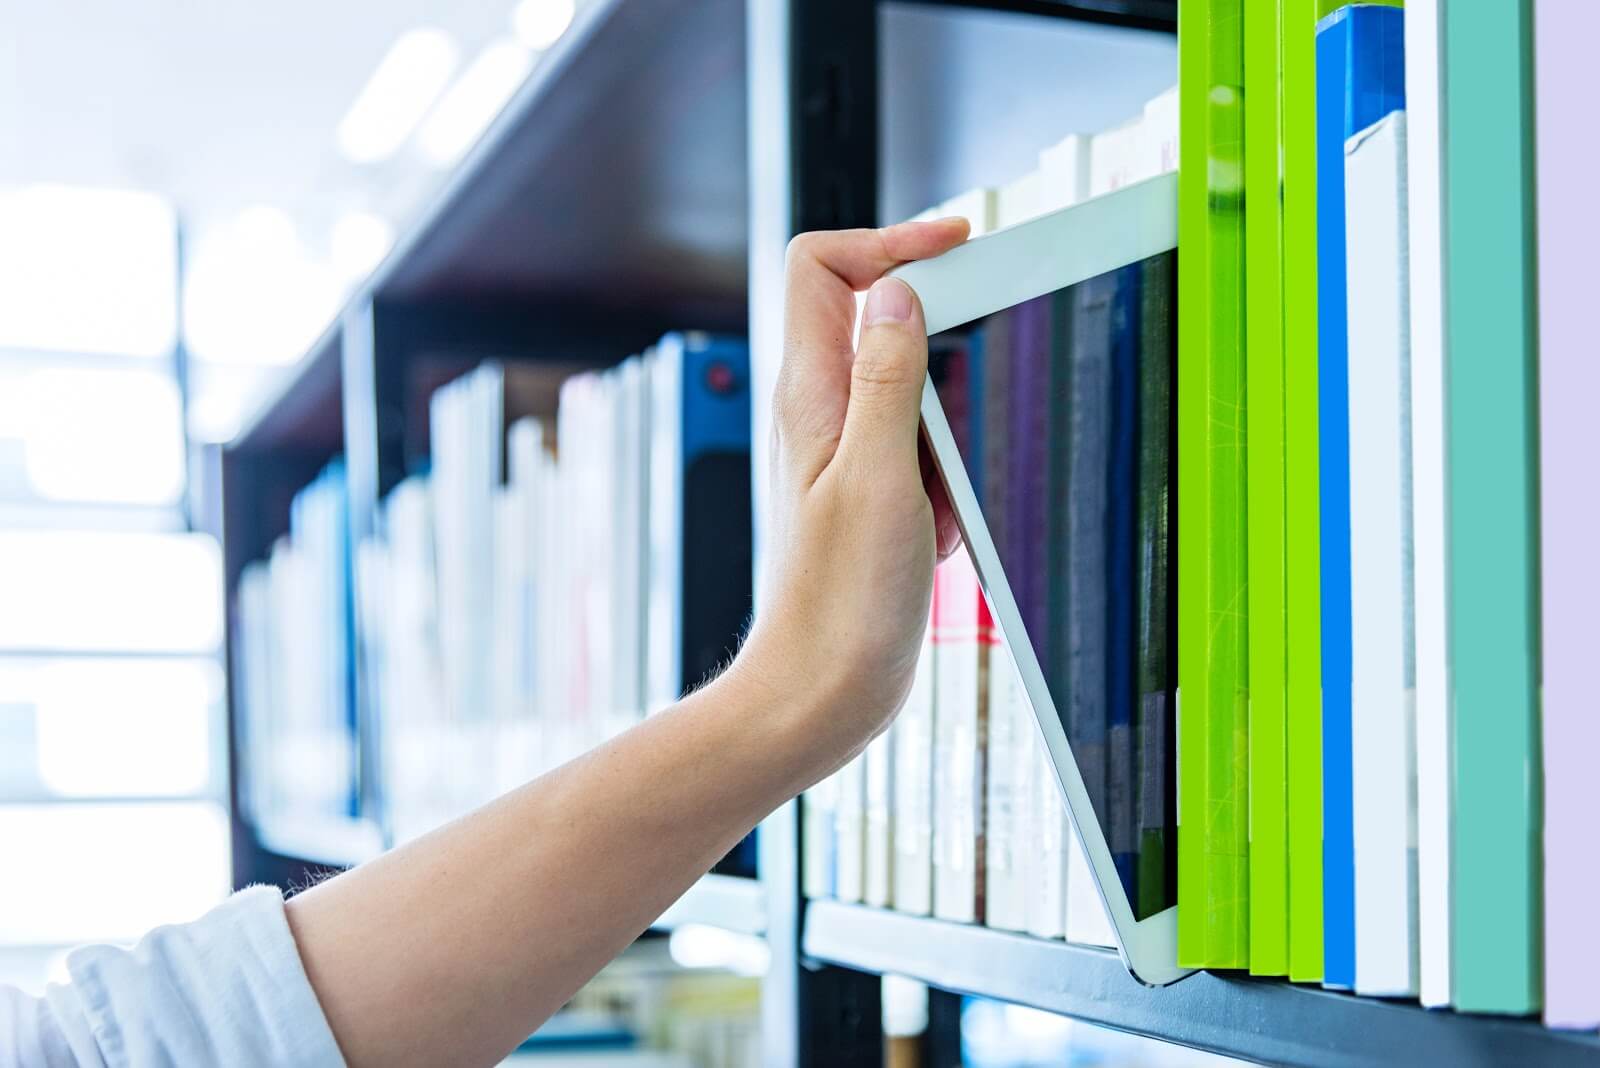 a person taking out a patient file from a shelf